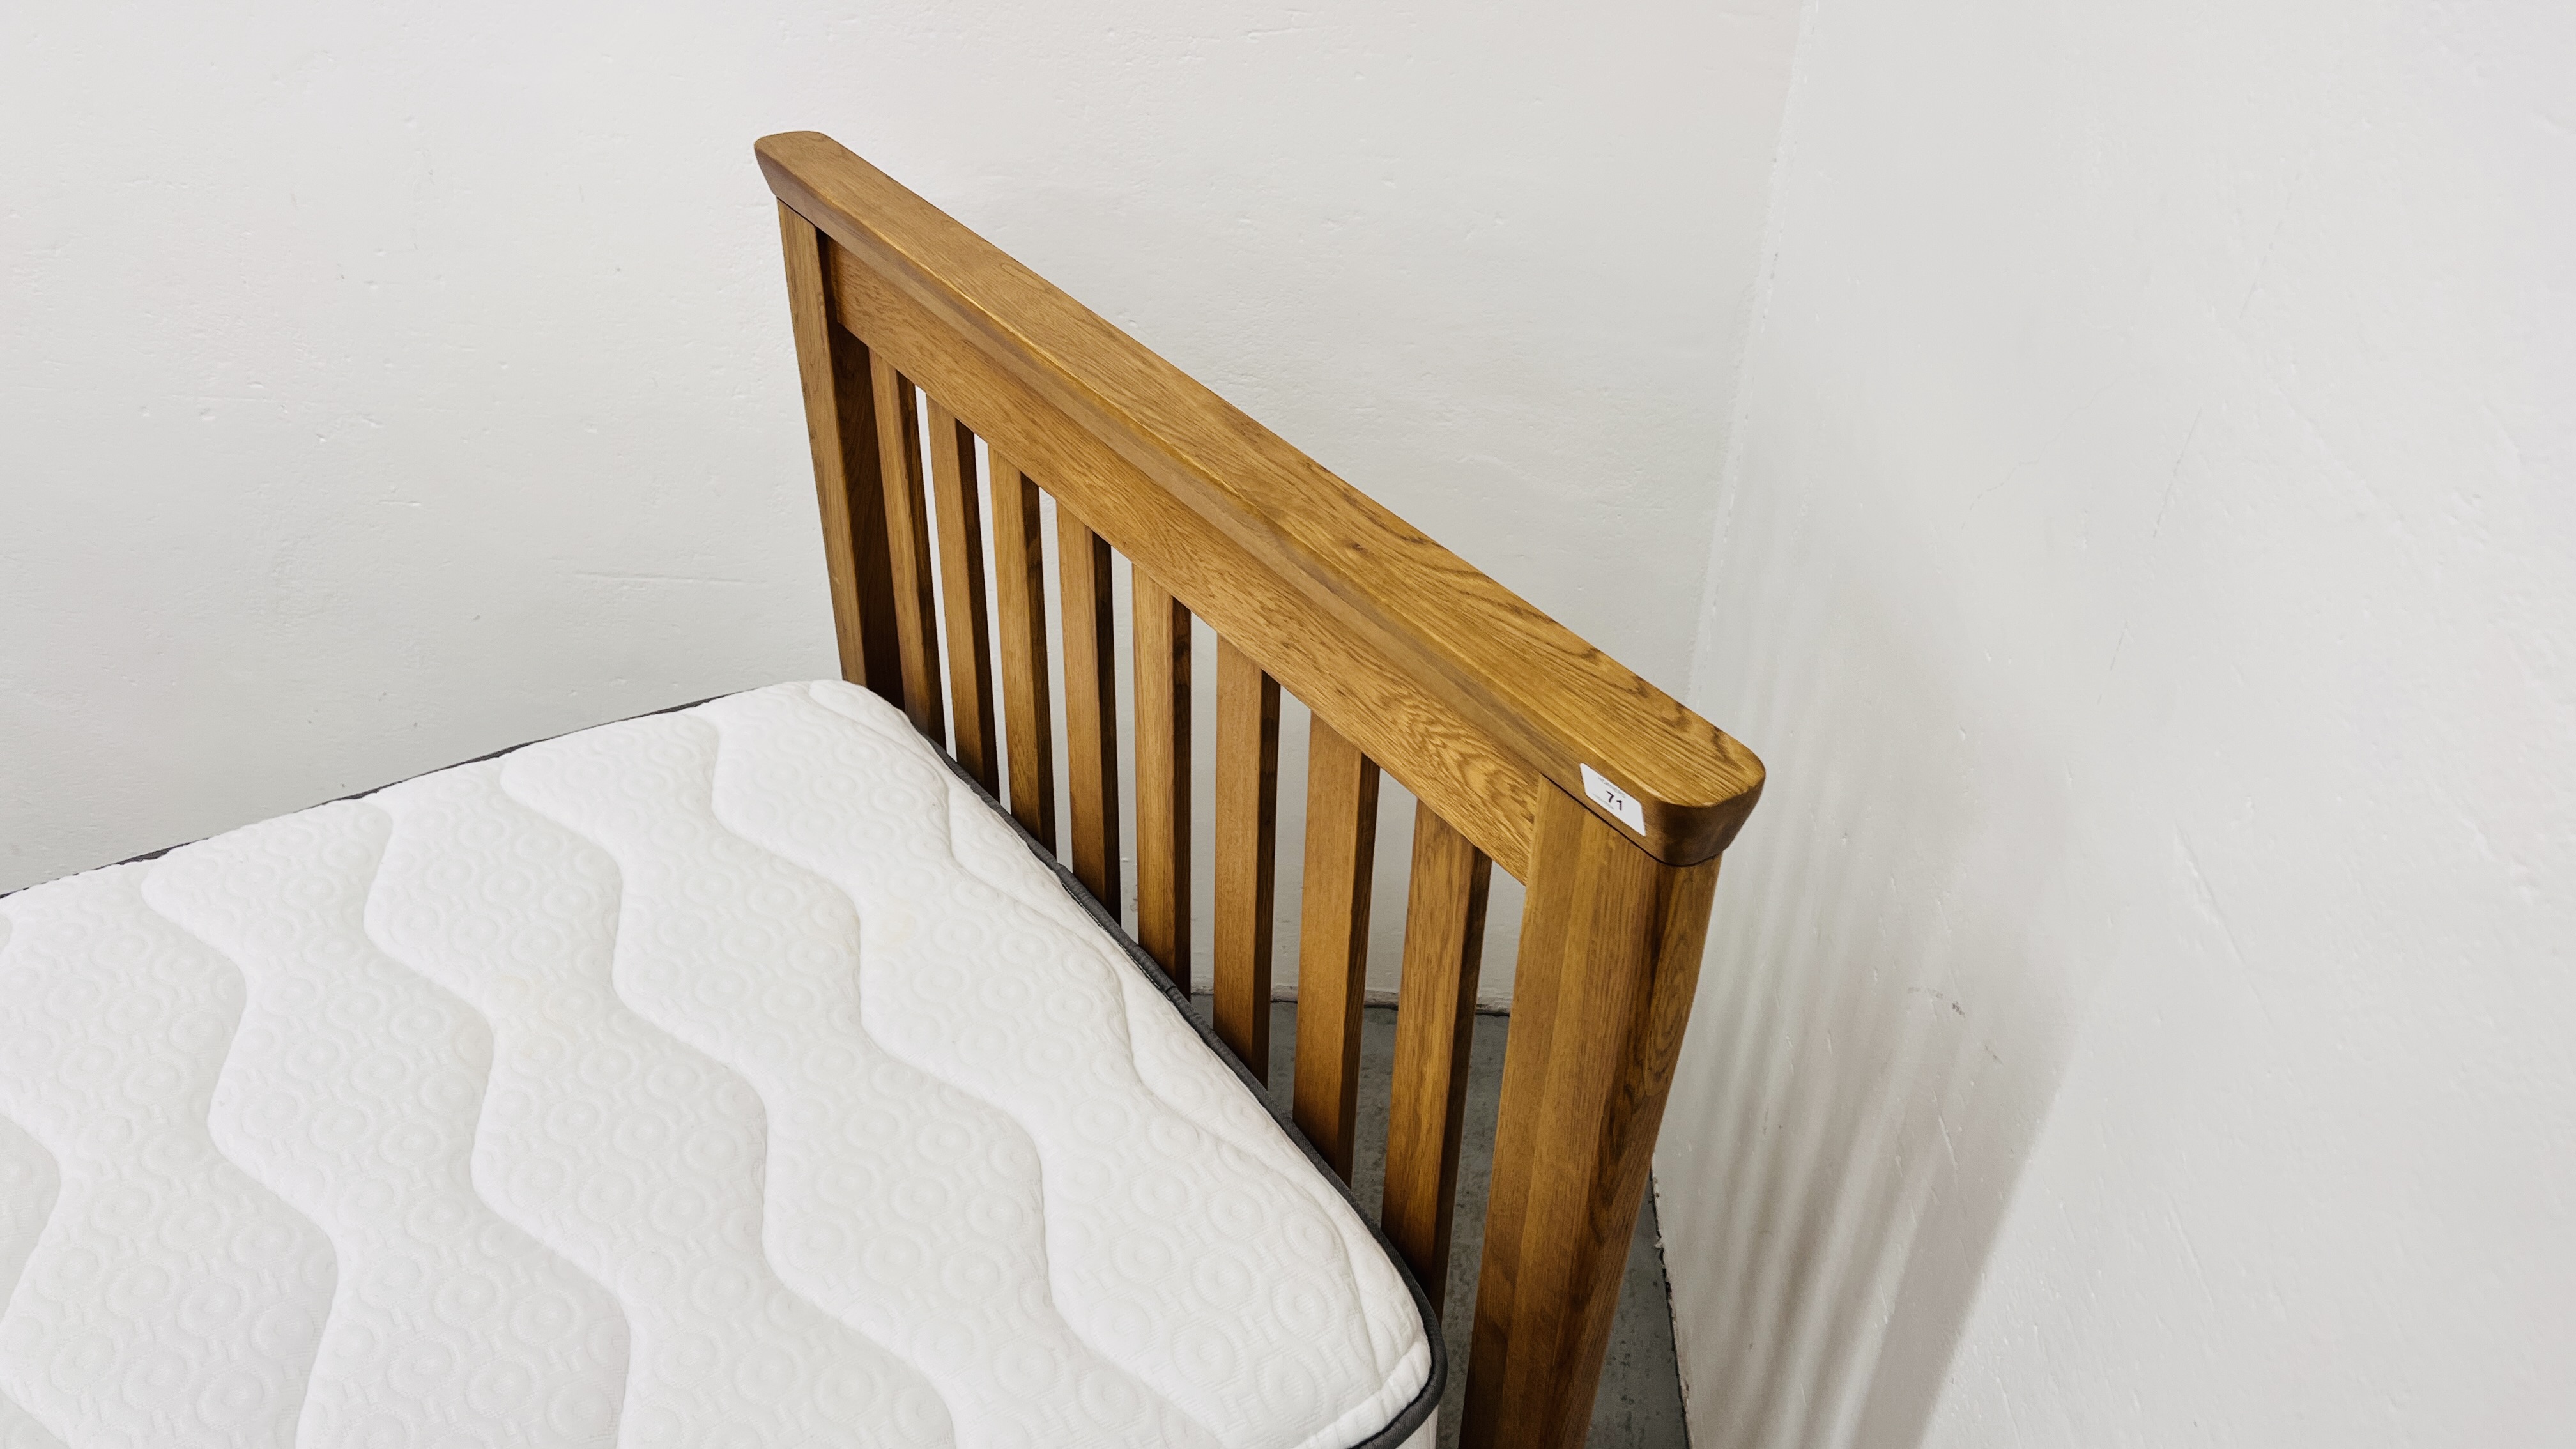 A GOOD QUALITY SOLID OAK SINGLE BED FRAME WITH SILENTNIGHT MIRROR POCKET 800 MEMORY MATTRESS. - Image 6 of 7